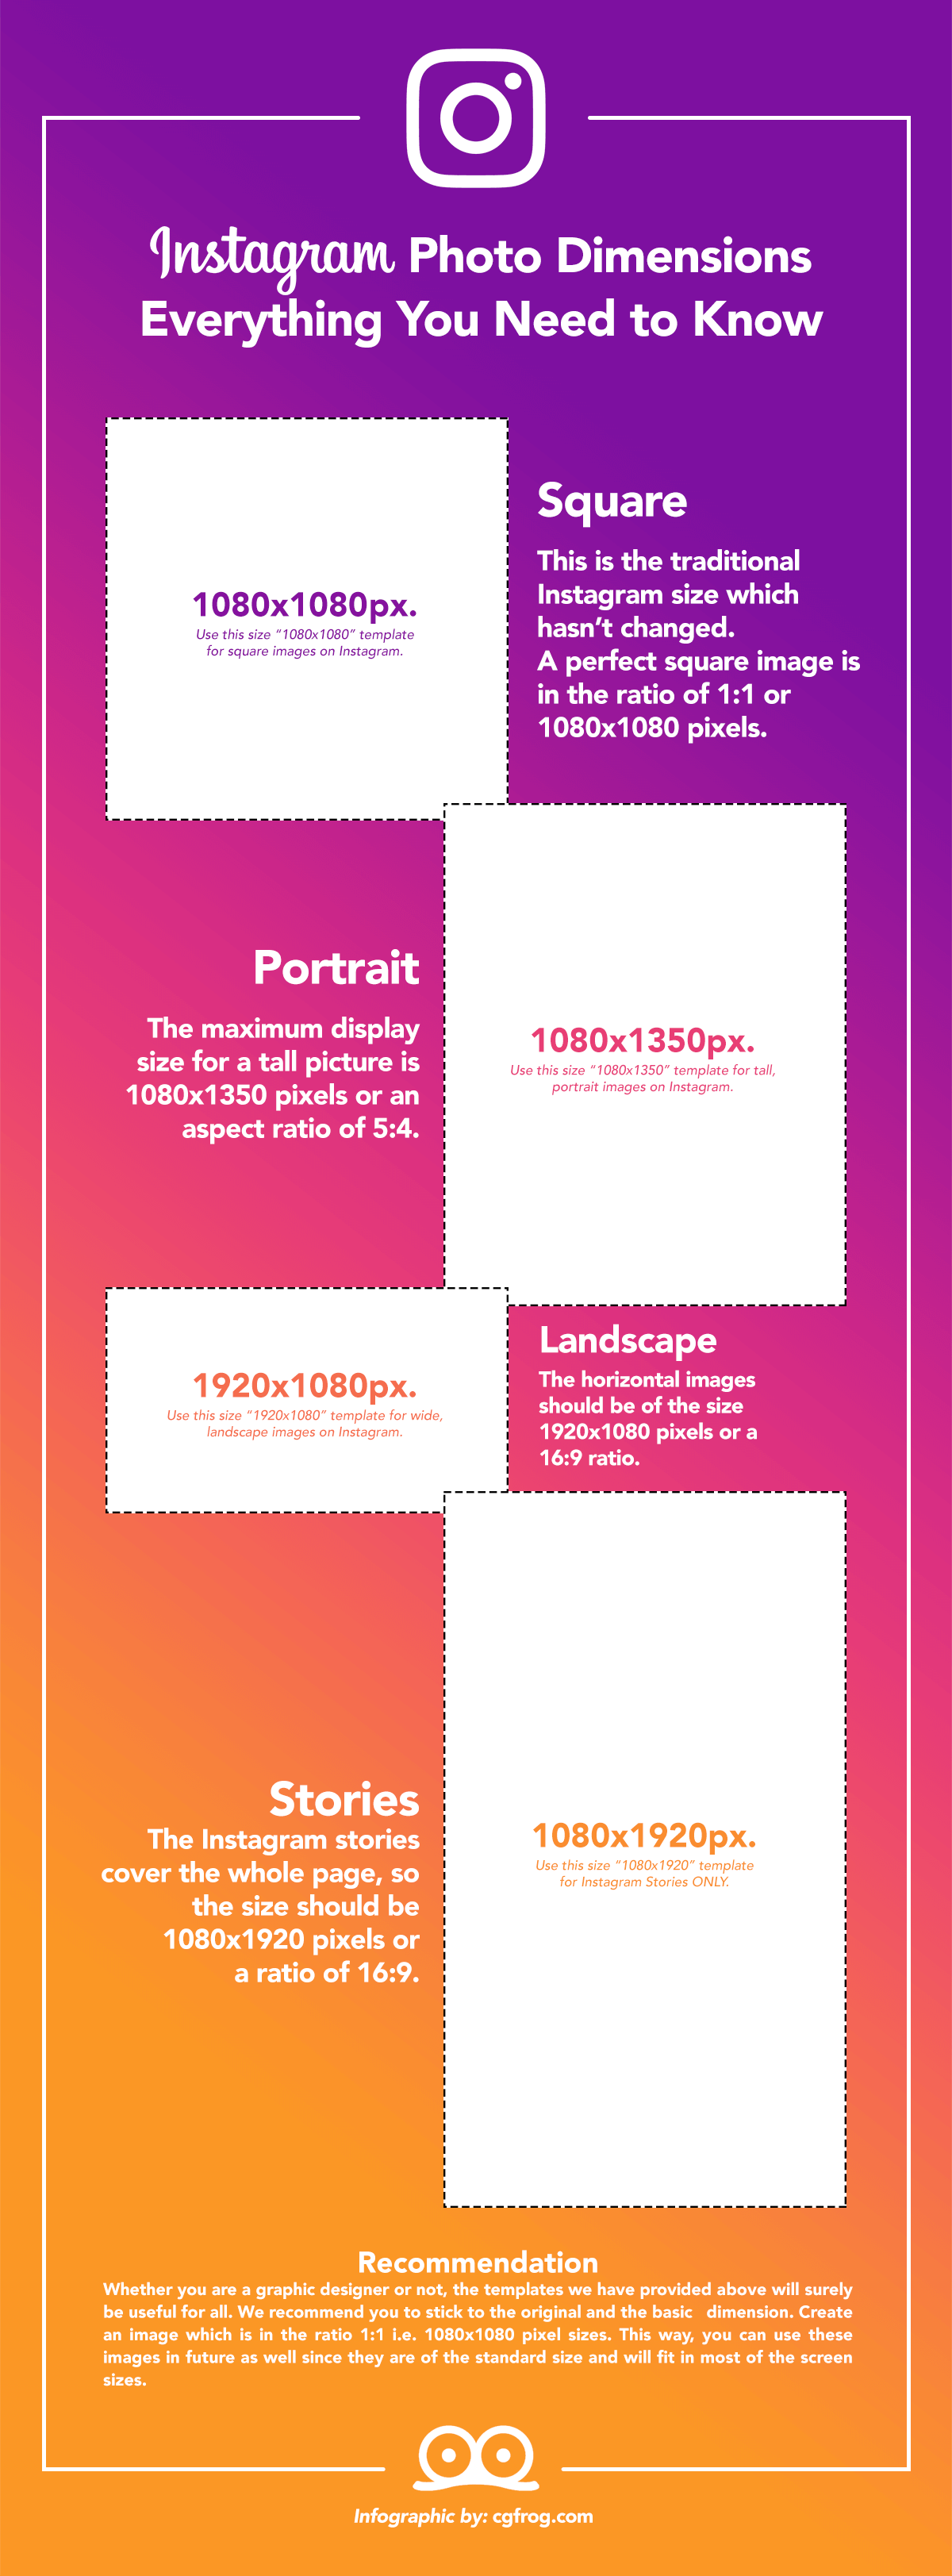 Infographic-Instagram Photo Dimensions and Size